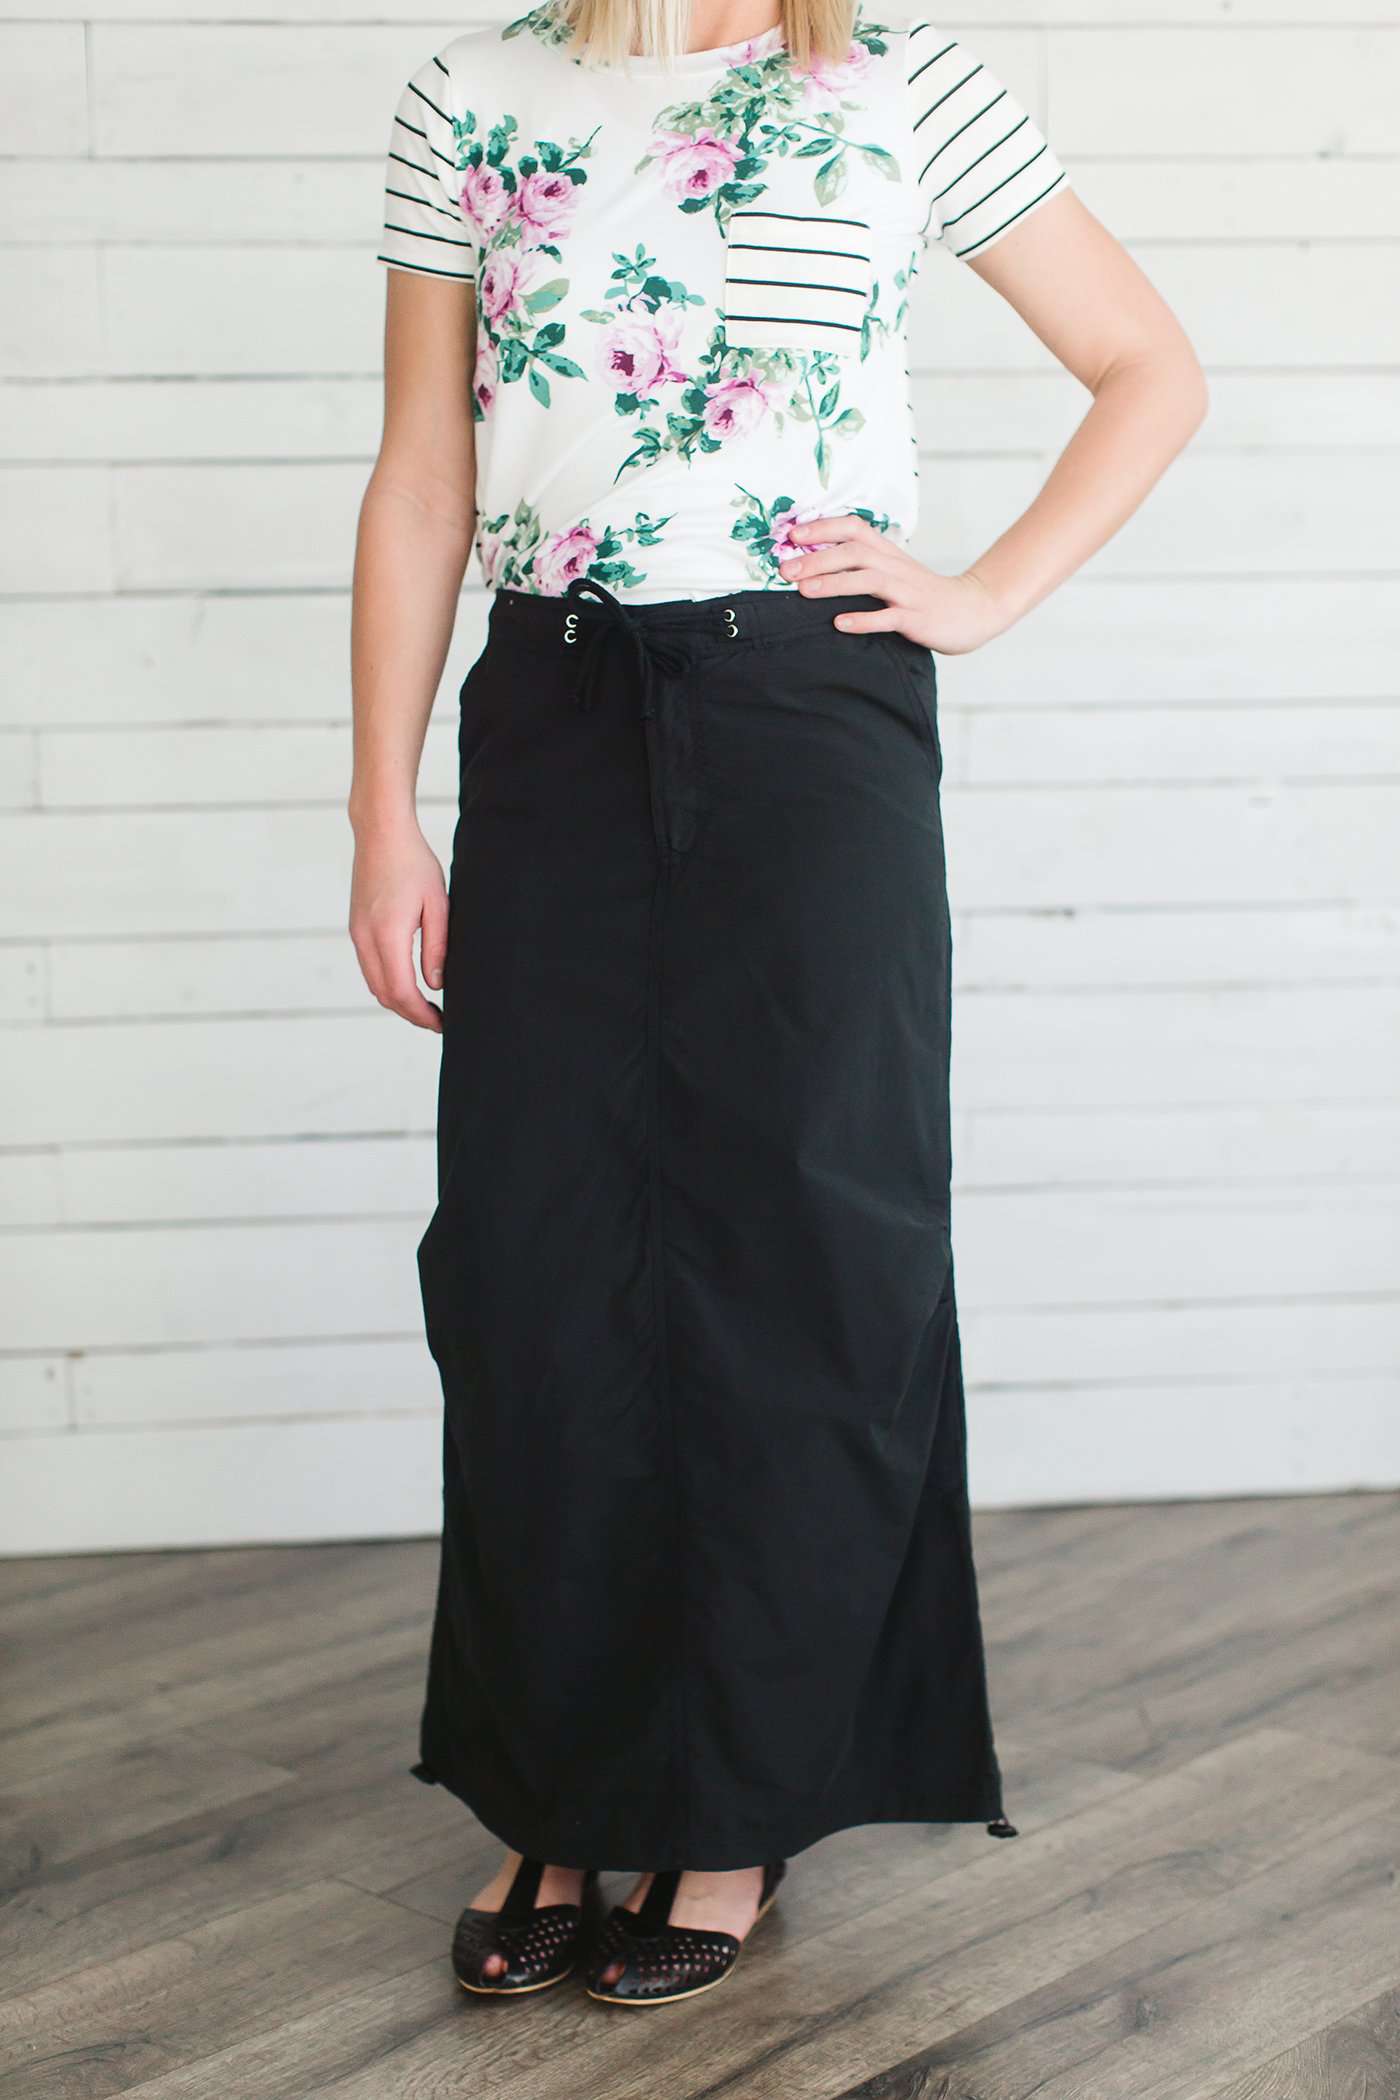 Black, tan or olive option in this long skirt with drawstring waist and side strings to adjust height from midi to maxi